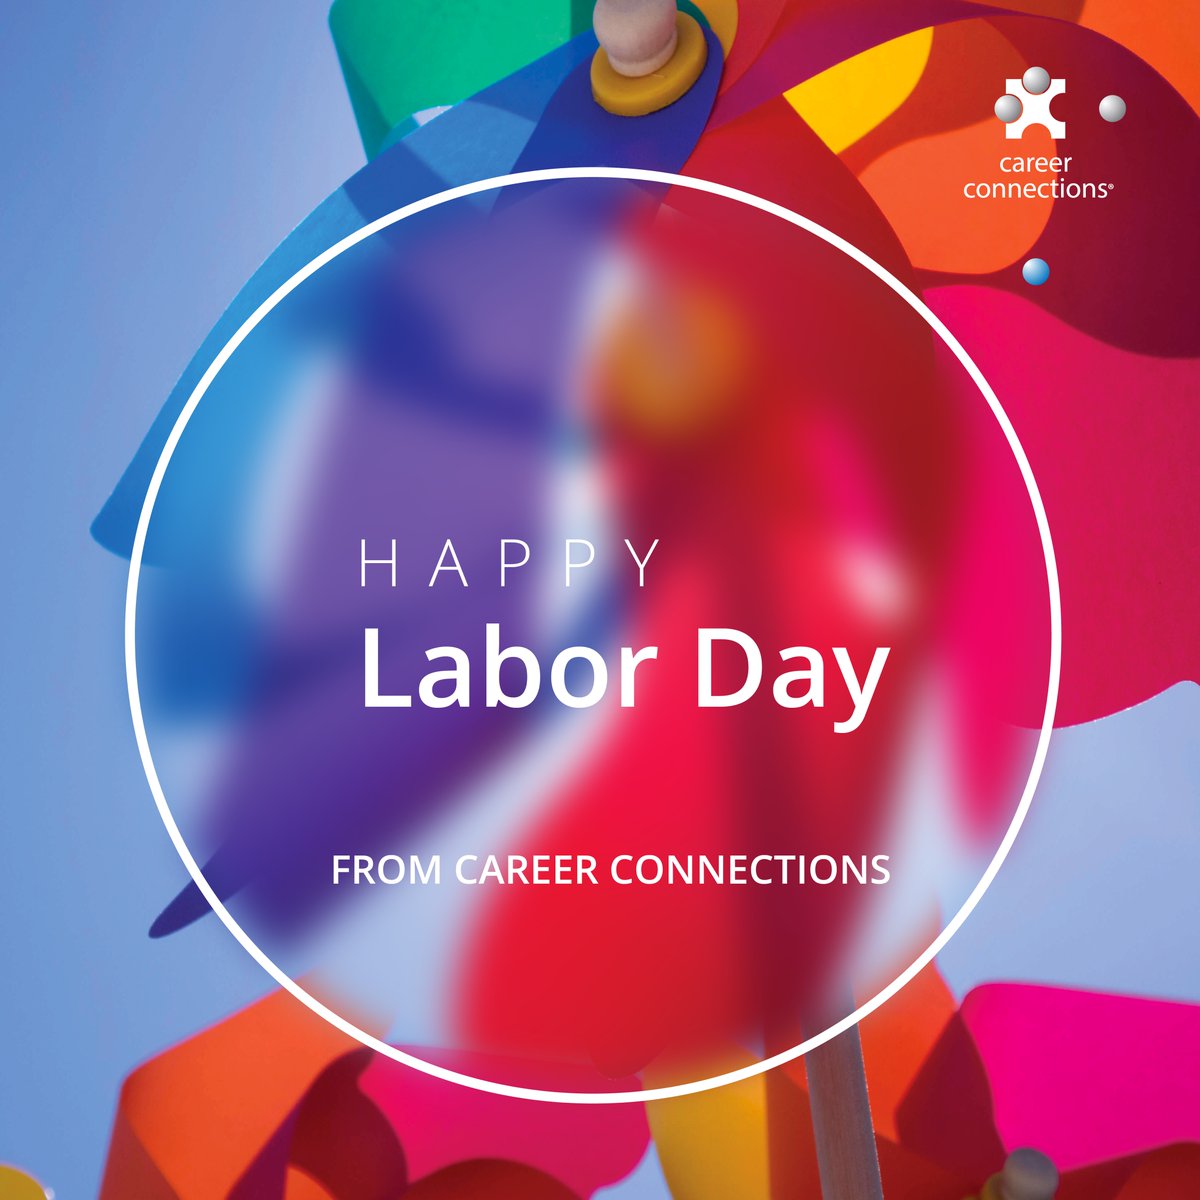 Today, we celebrate the hard work and dedication of every individual contributing to the prosperity of our nation. Happy Labor Day to all who keep our communities and economies thriving!

#LaborDay #ThankYou #WorkforceAppreciation #CareerConnections